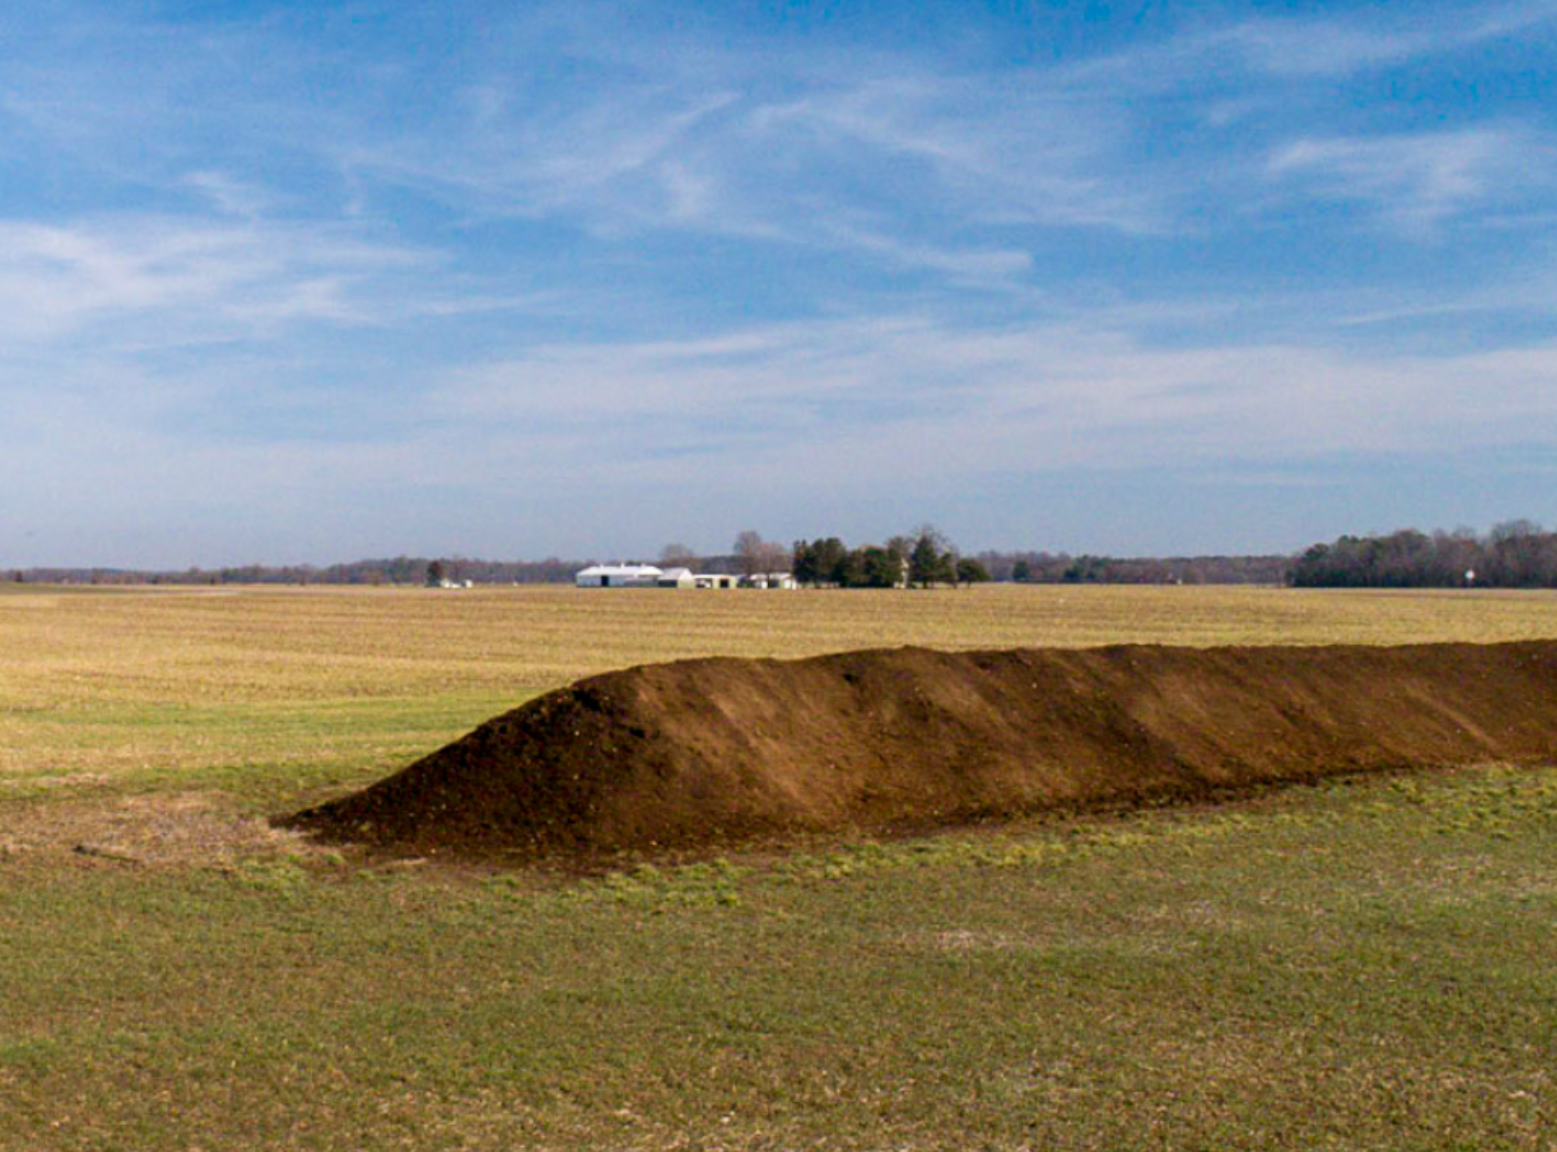 farm field with field staged poultry litter in a windrow